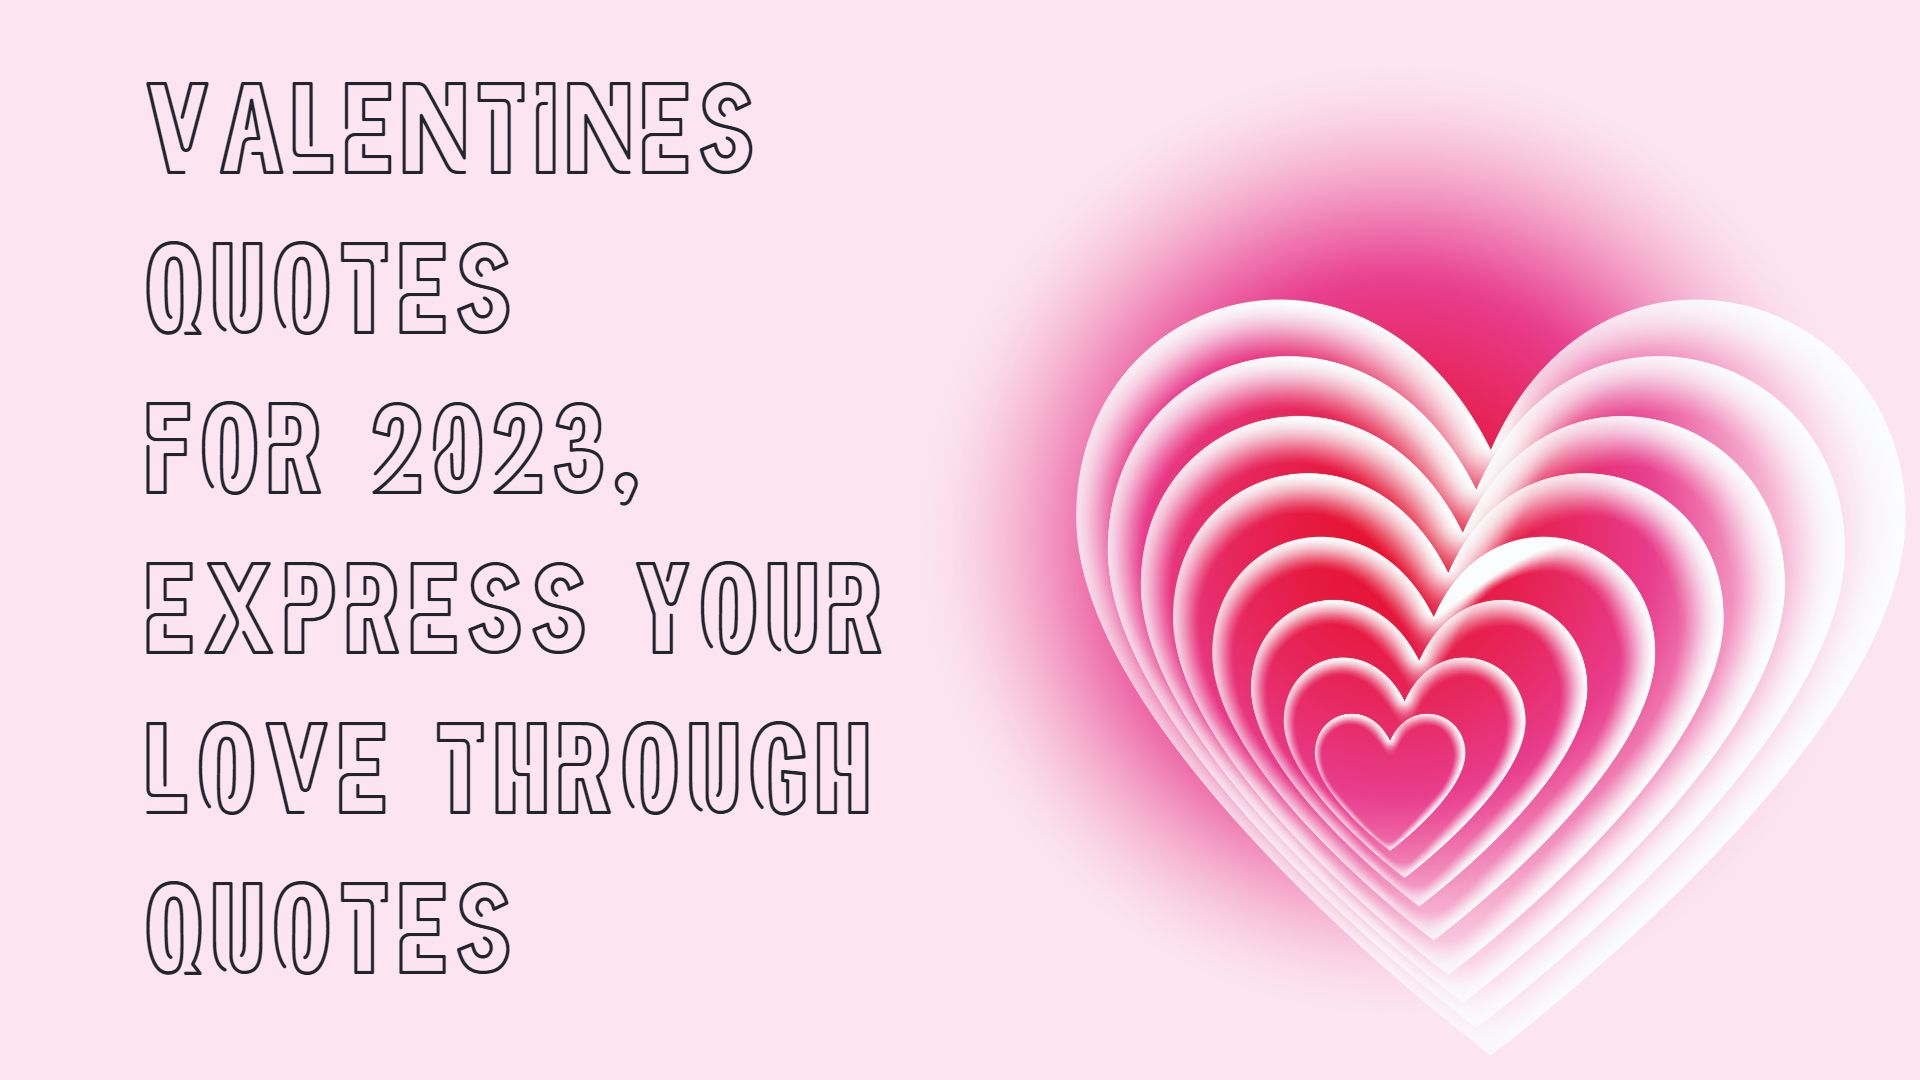 Valentines Quotes for 2023, Express your love through Quotes